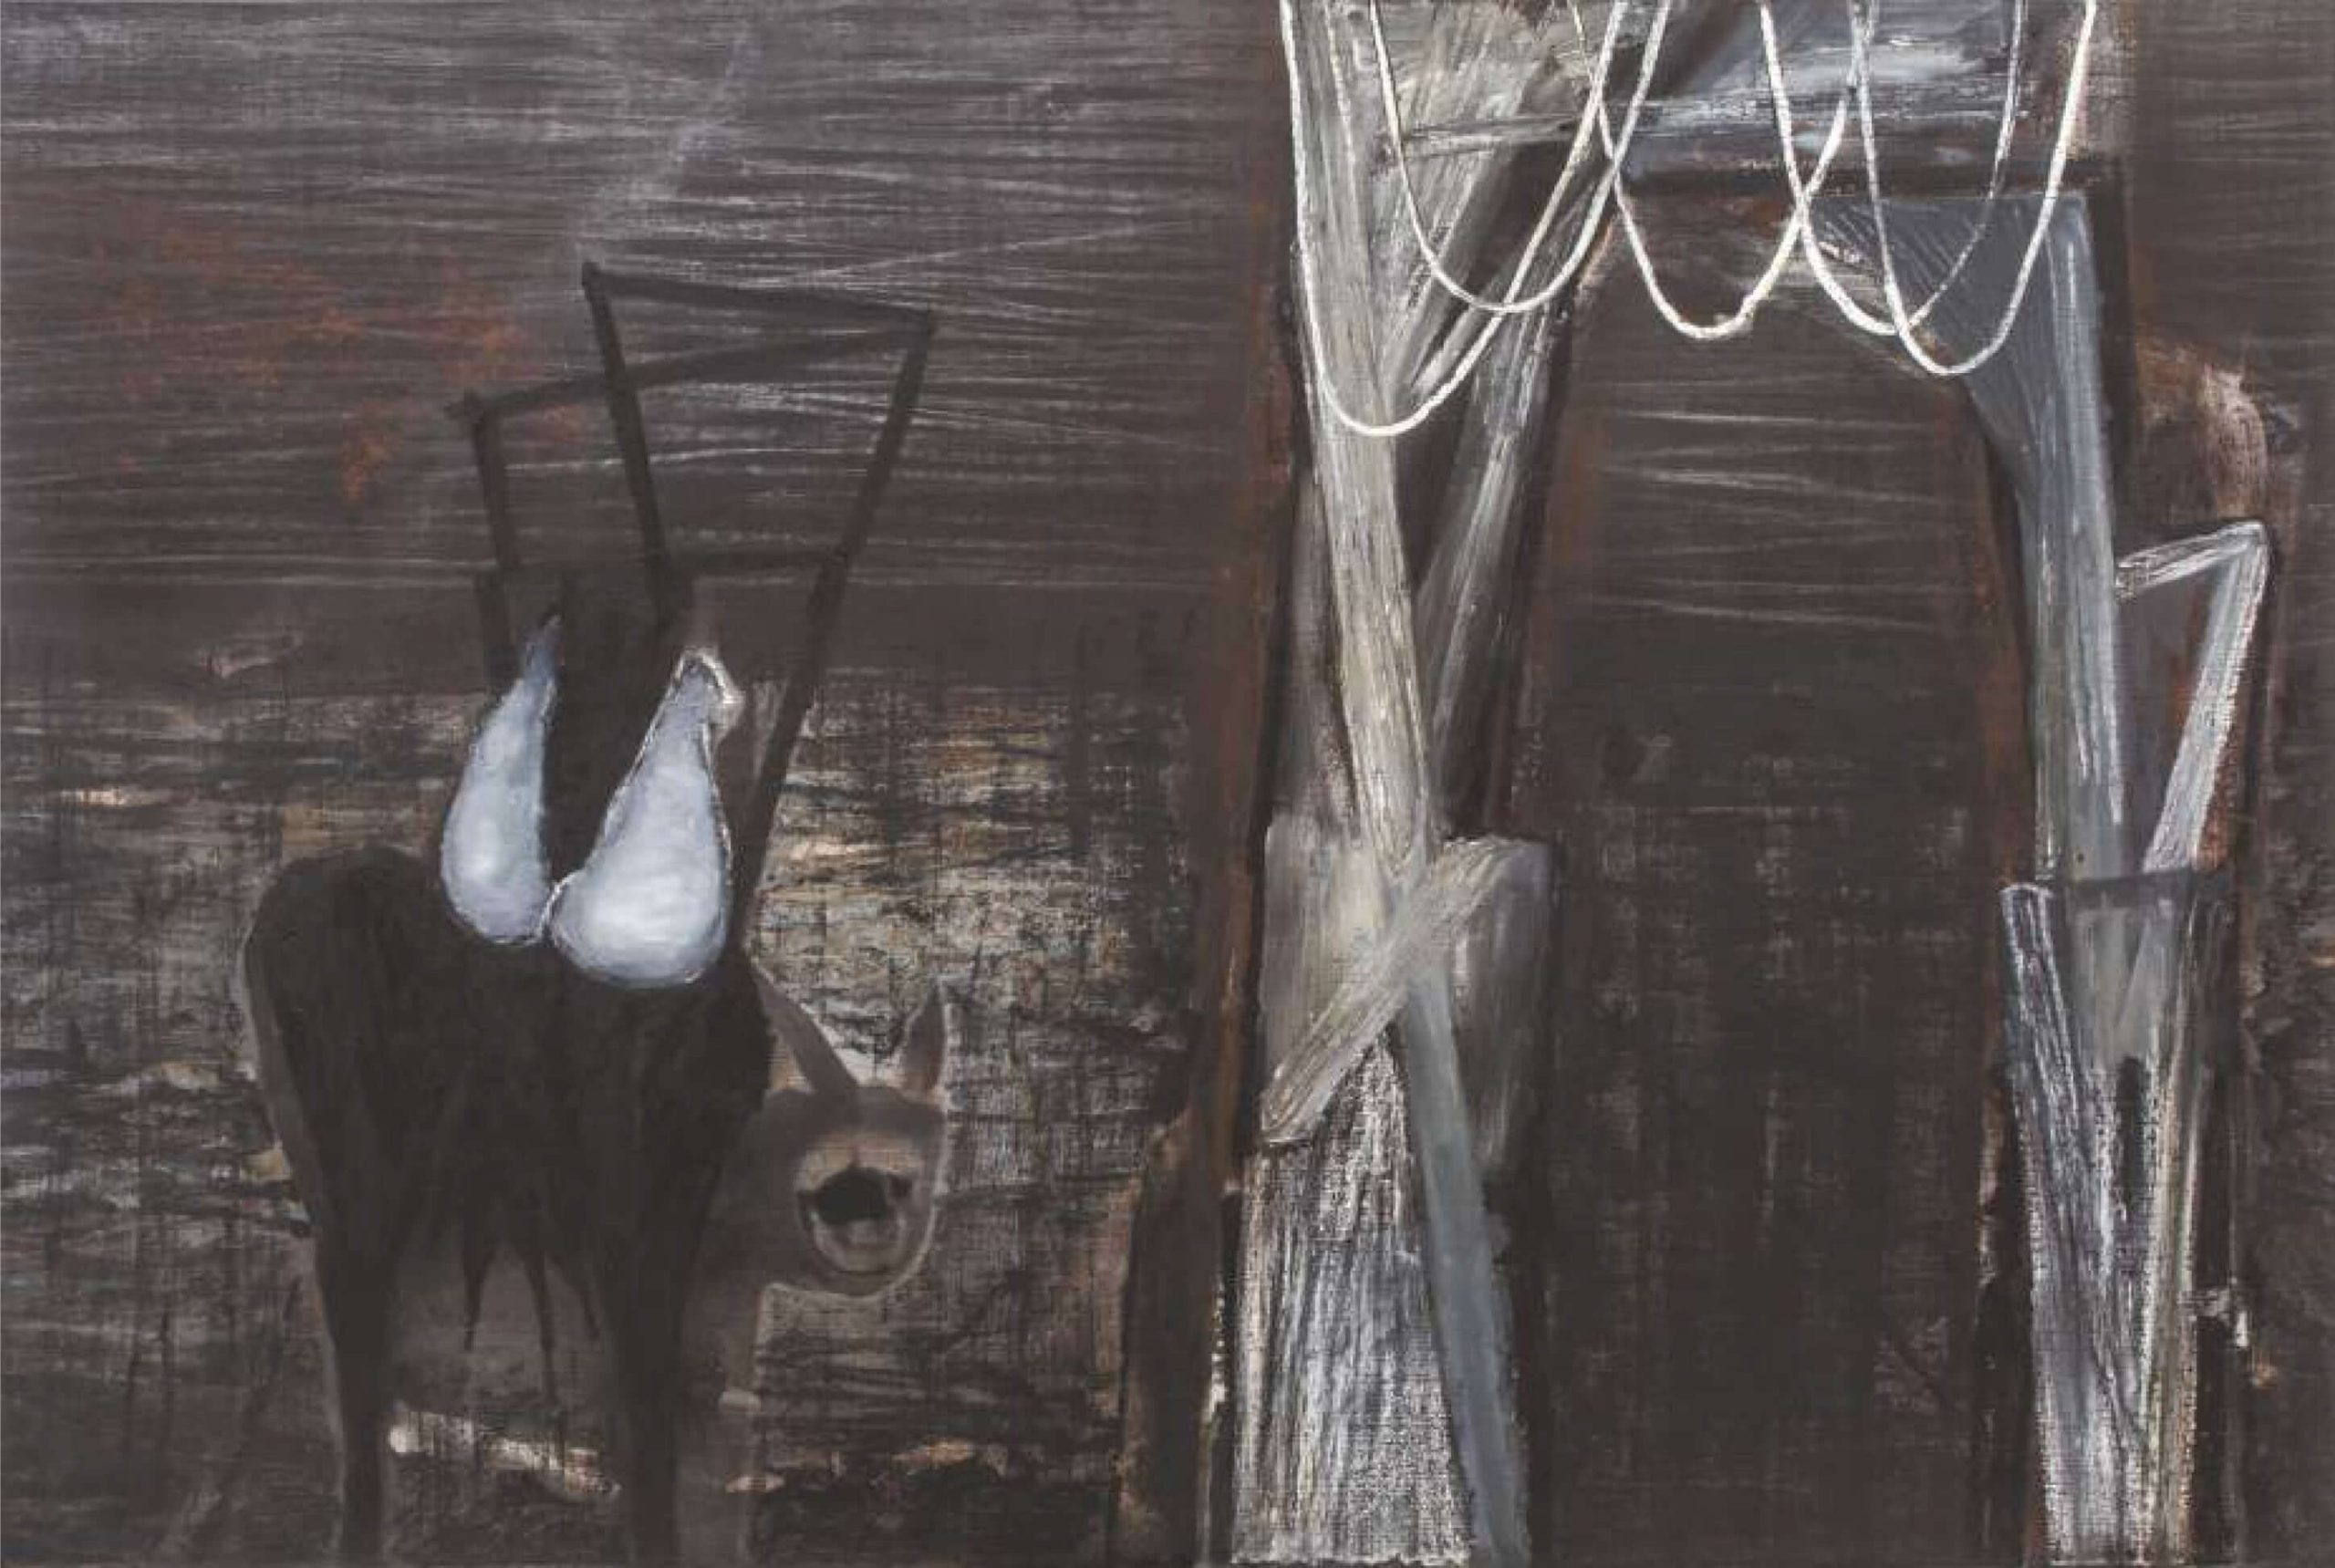 THE PORTAL ACRYLIC CHARCOAL OIL ON LINEN 48x 72 IN 2013